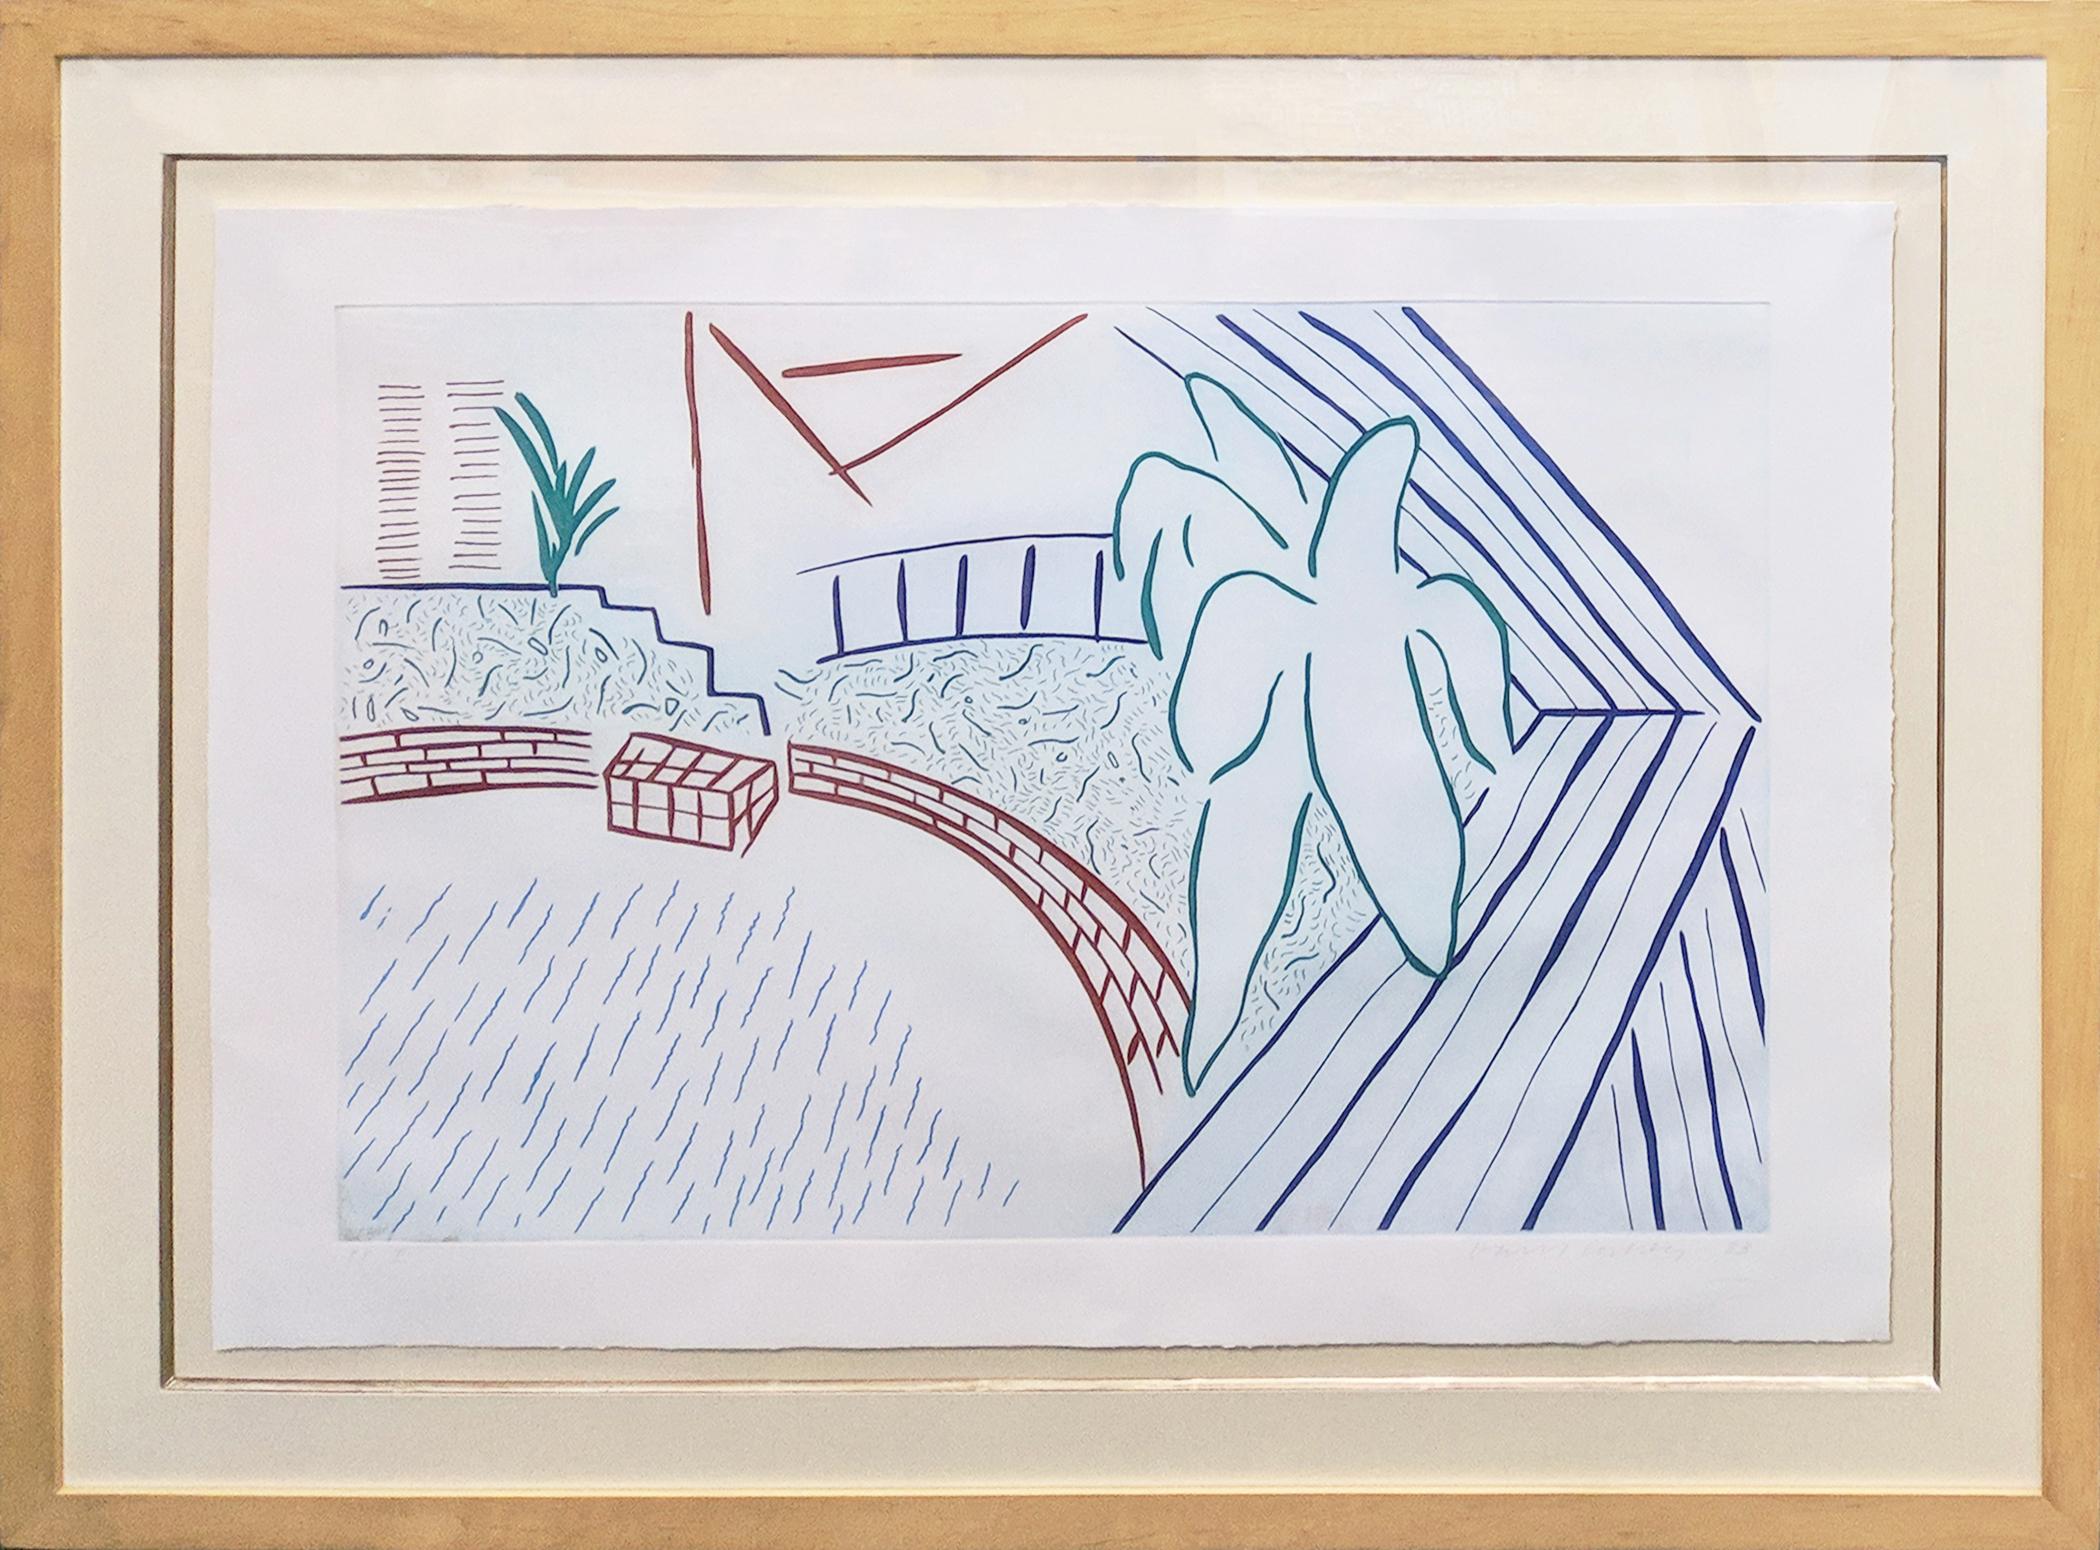 MY POOL AND TERRACE - Print by David Hockney